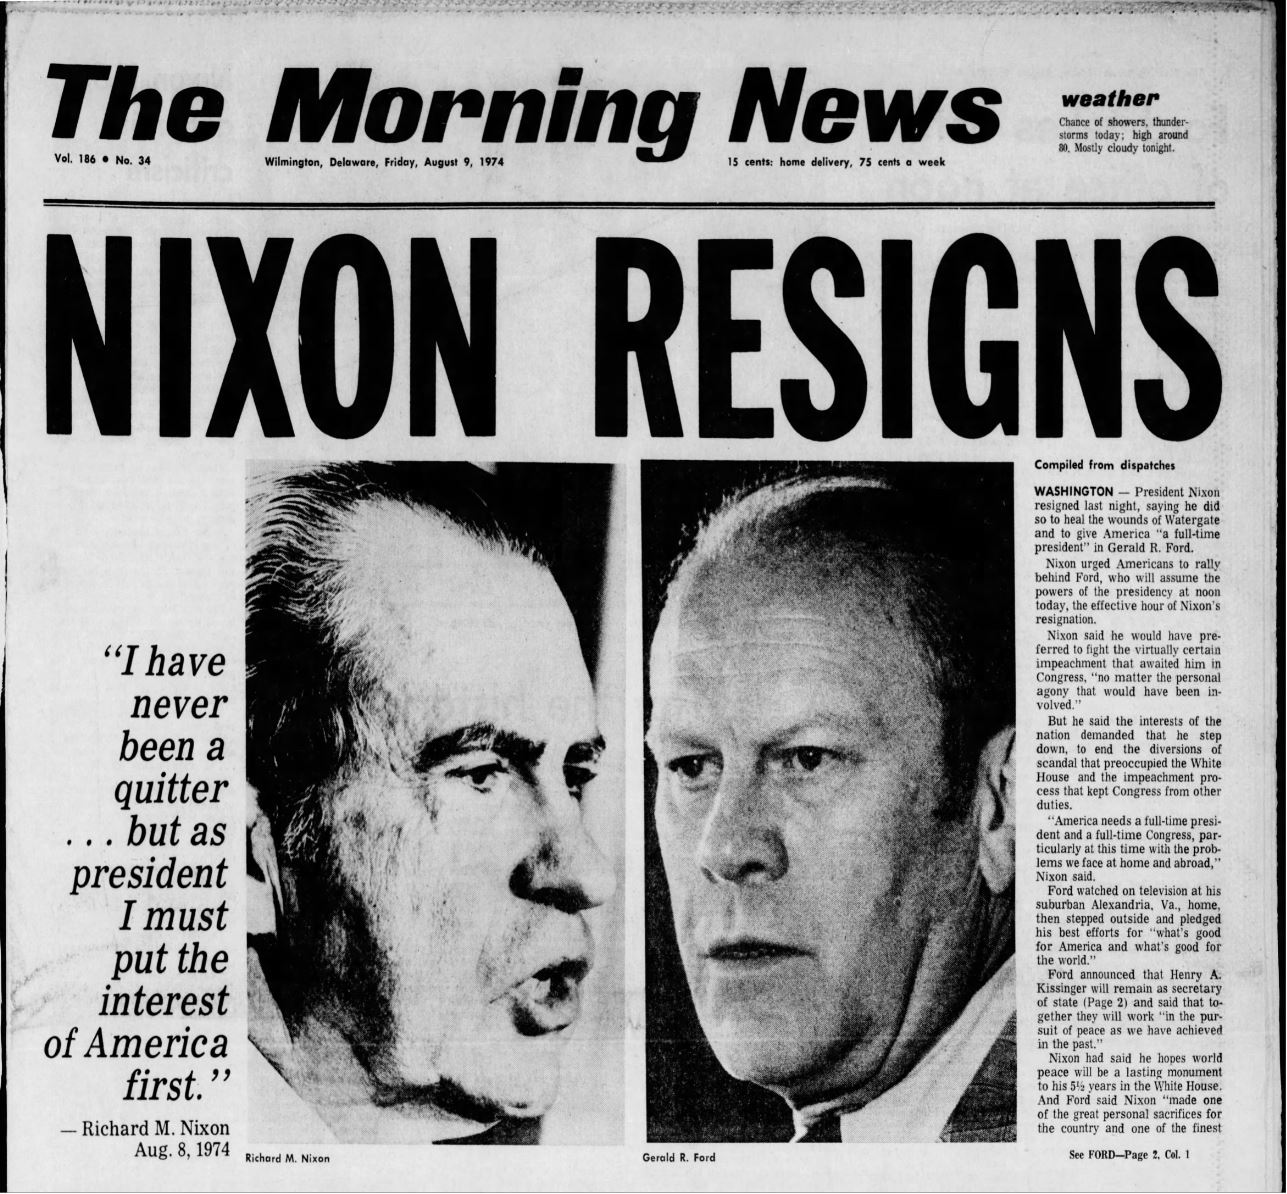 Headlines announcing Nixon's resignation following the Watergate scandal (The Morning News, via Newspapers.com)